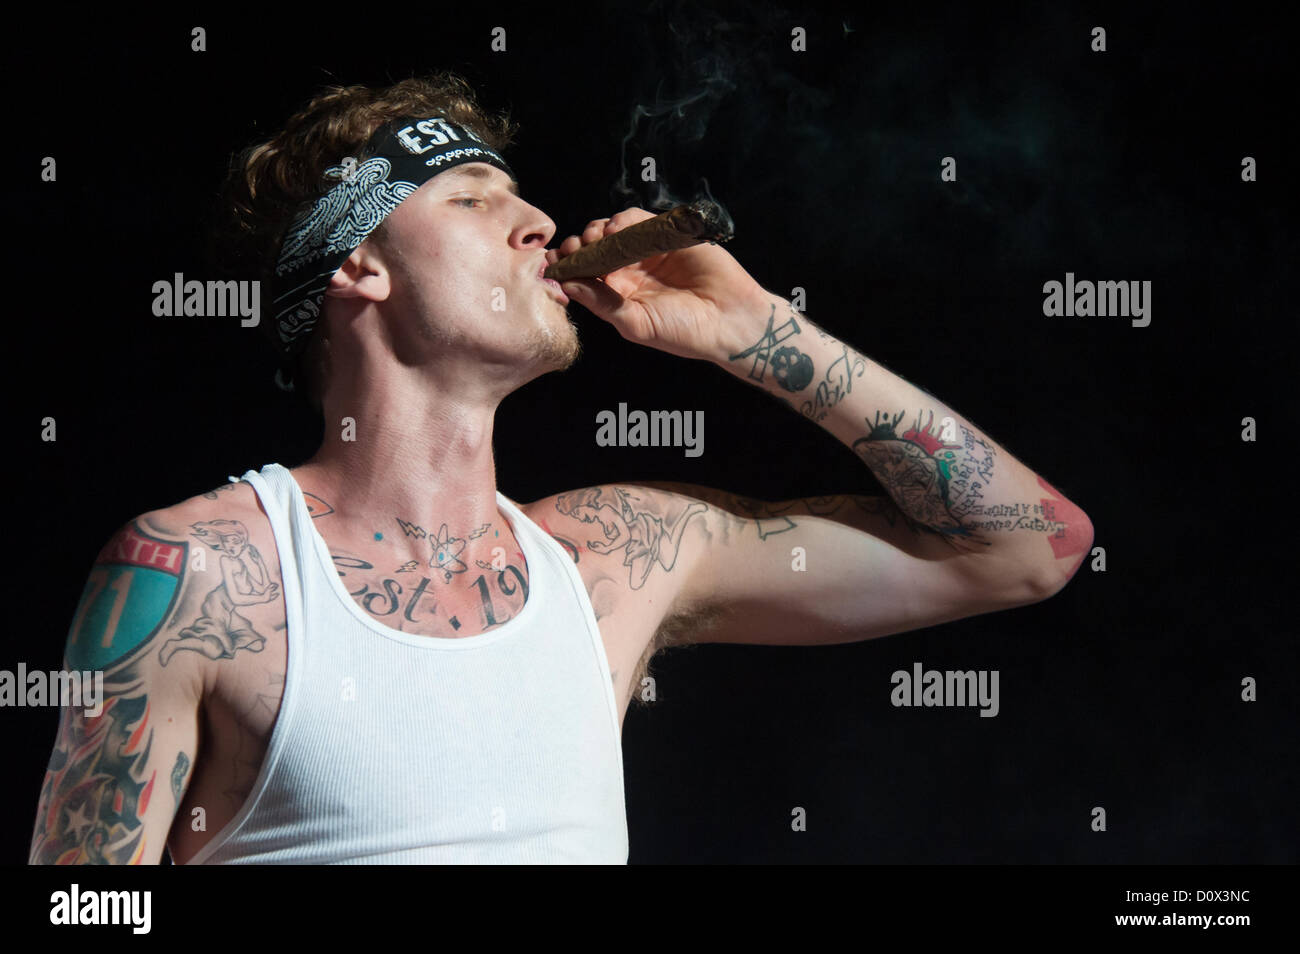 SACRAMENTO, CA – December 1: Machine Gun Kelly performs in Rick Ross’ MMG Tour featuring Meek Mill and Wale Folarin at Sleep Train Arena in Sacramento, California on December 1, 2012. Stock Photo